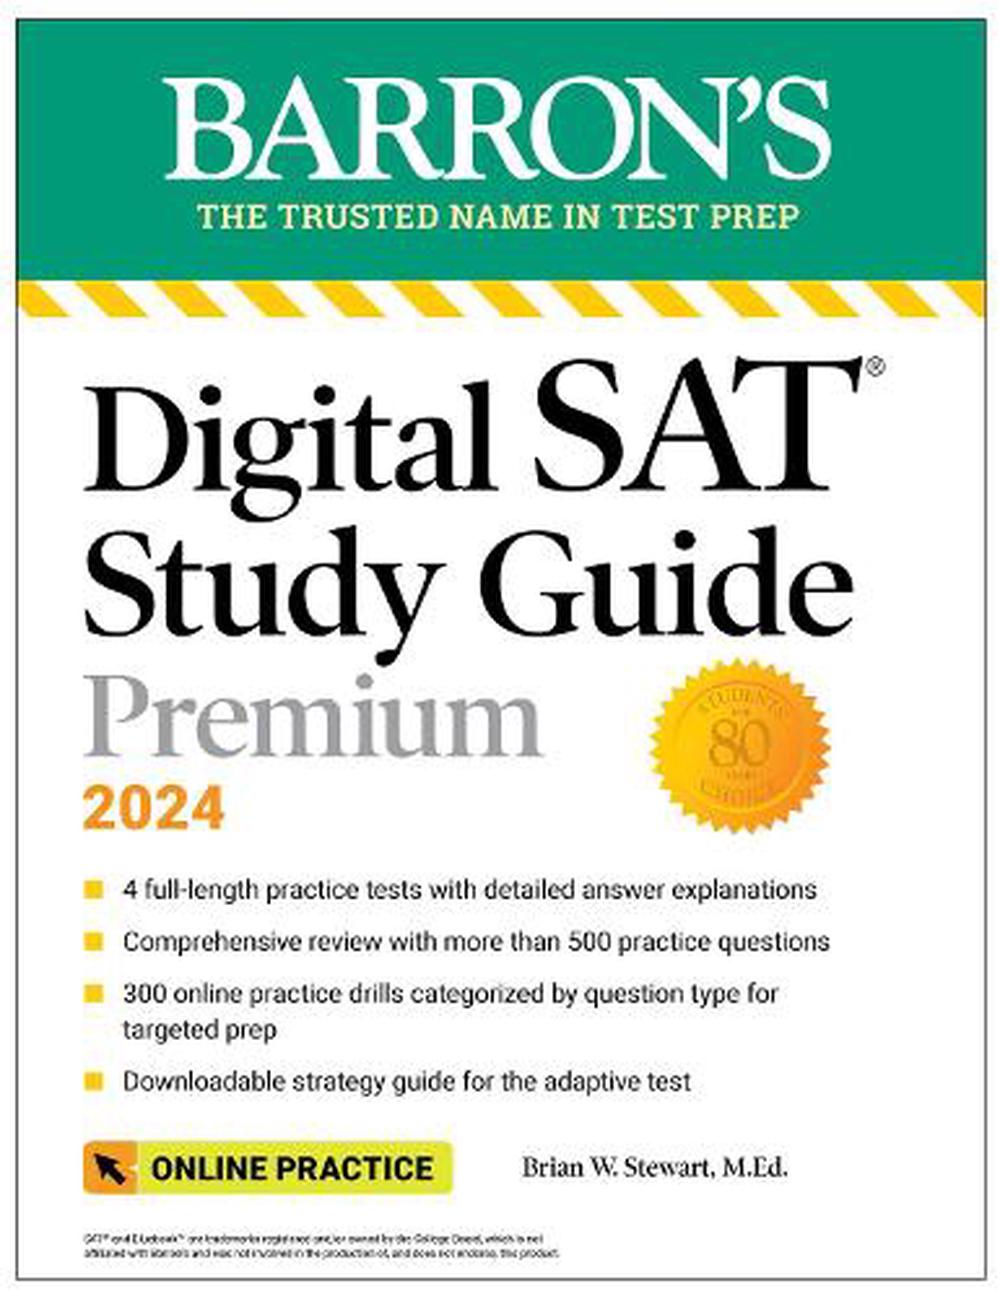 Practice　Stewart,　Premium,　The　Paperback,　at　Tests　Brian　online　2024:　Review　Buy　Guide　9781506287522　W.　Study　Online　by　Comprehensive　Practice　SAT　Digital　Nile